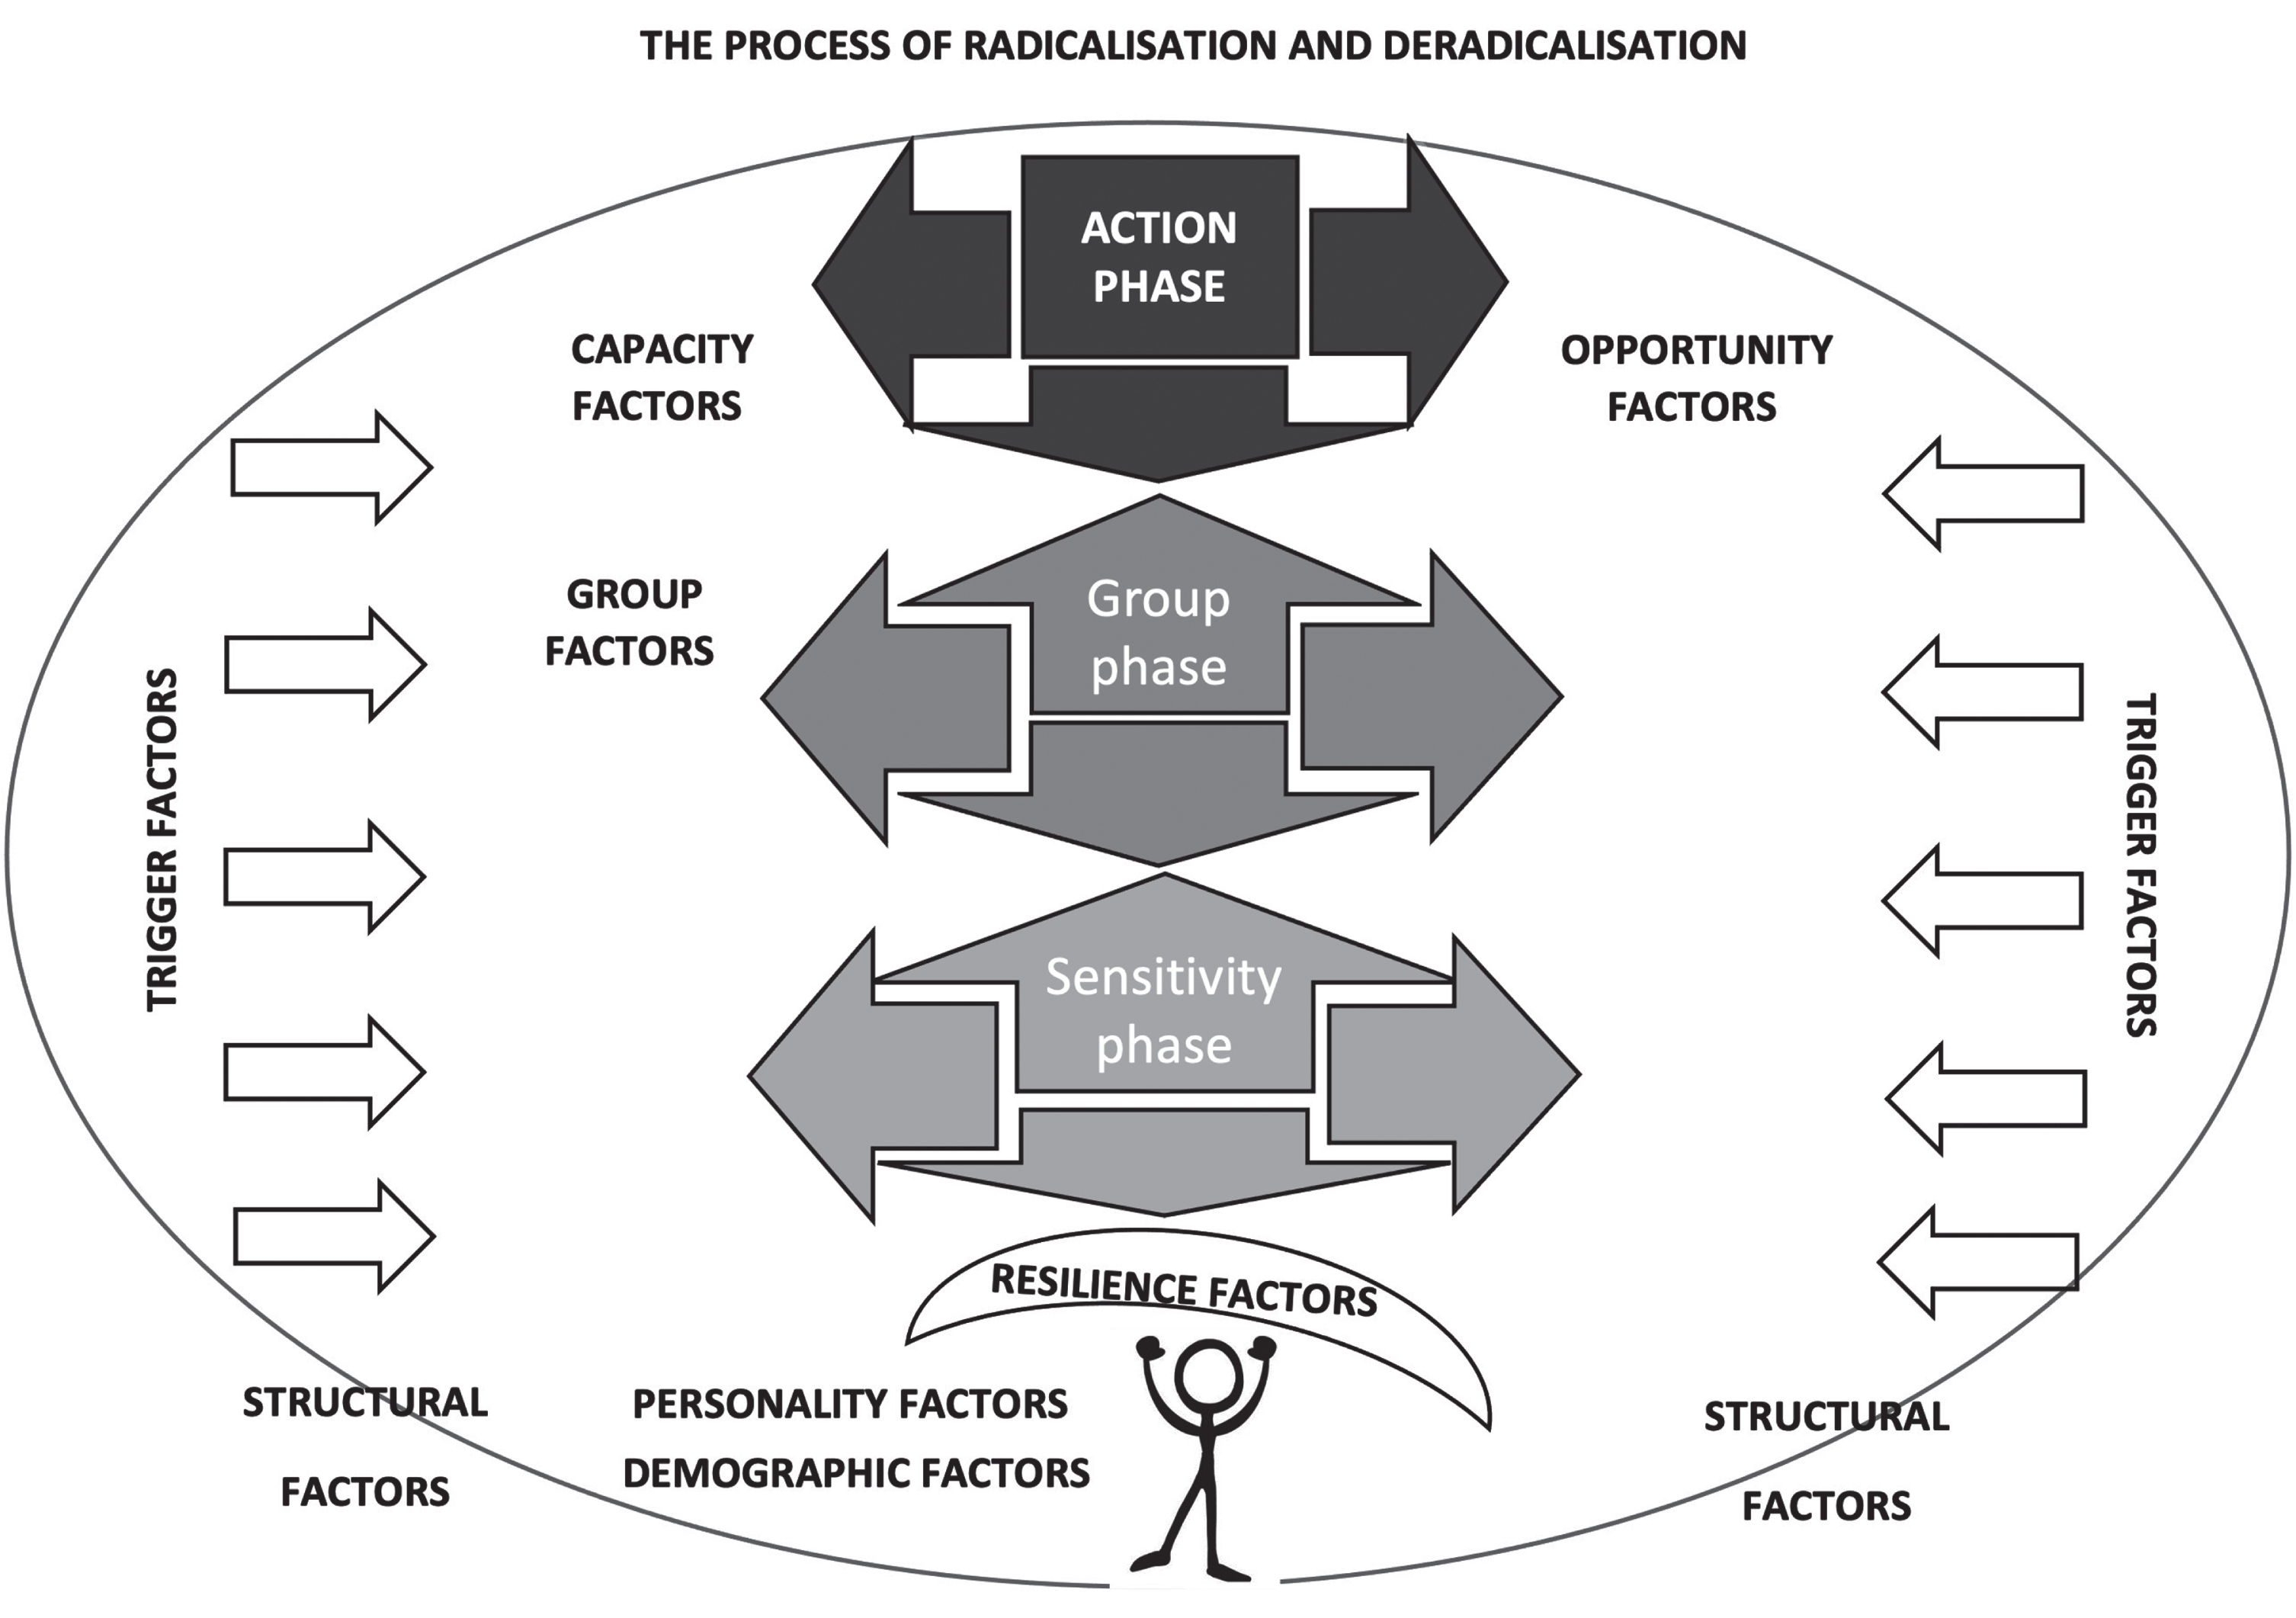 Theoretical Model of (De)radicalization.Note. Based on Doosje et al. (2016), with three phases (the sensitivity, group and action phase), and various factors that can contribute to an upward movement (towards further radicalisation) and a downward or sideways movement (towards deradicalisation or disengagement). The shield above the individual symbolises resilience against (de)radicalisation.